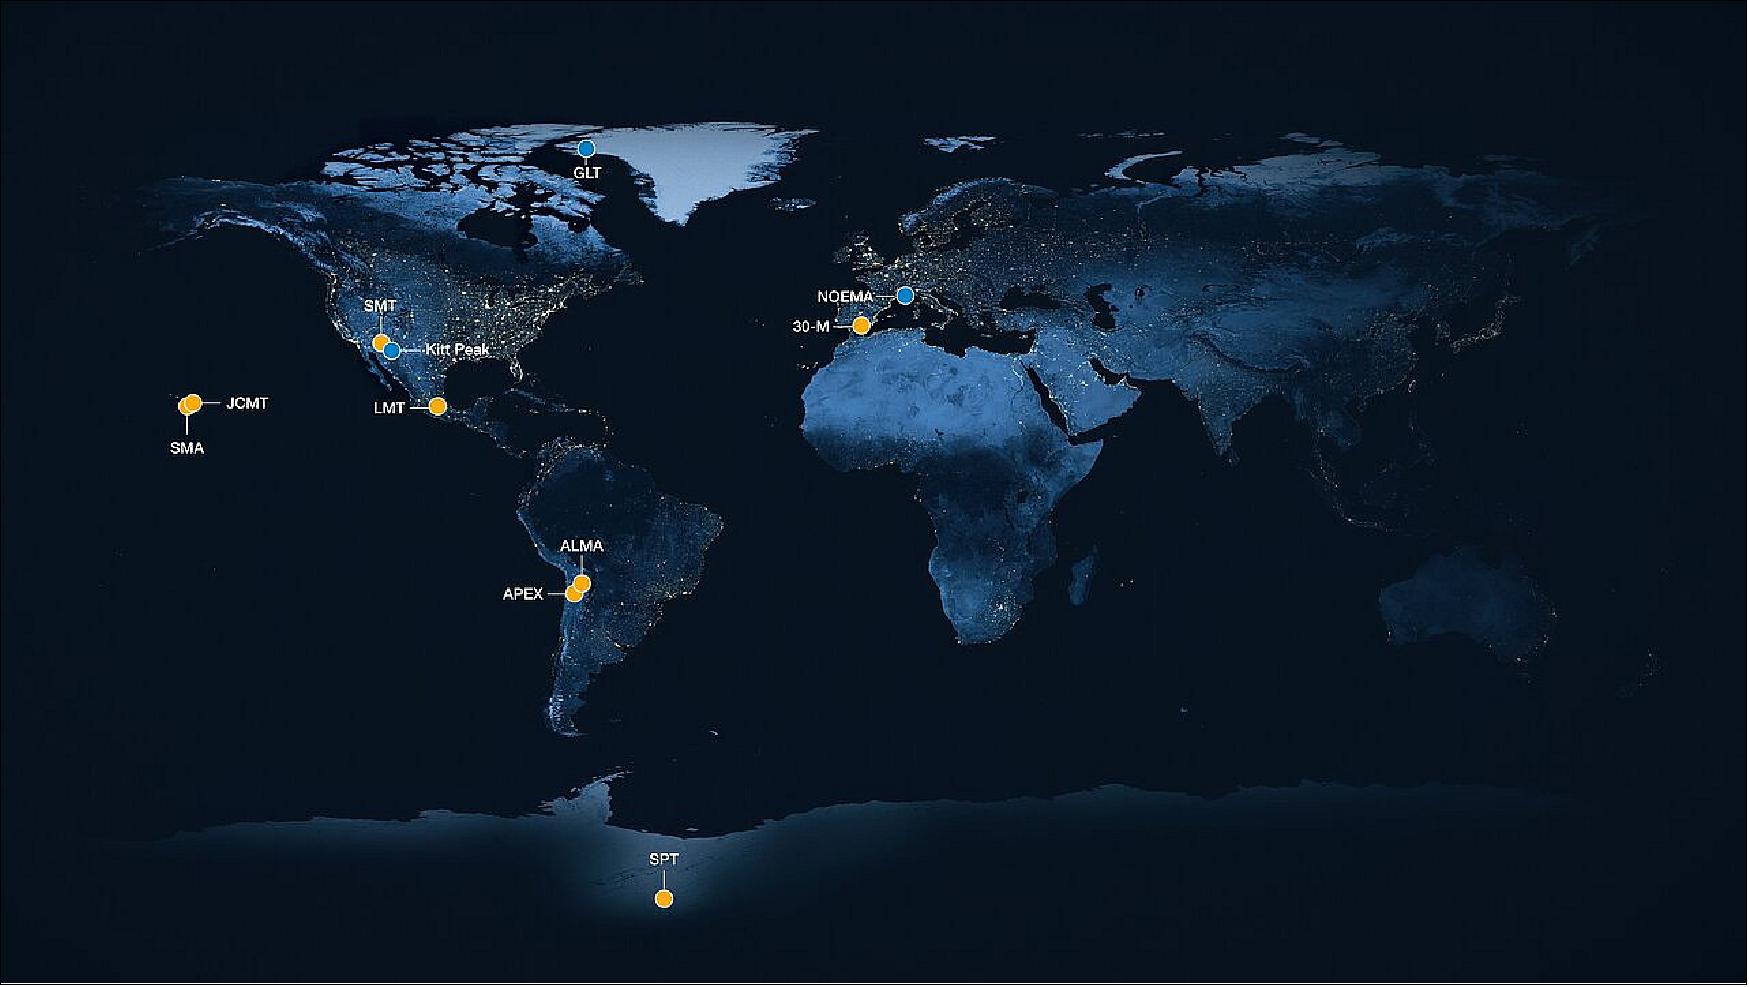 Figure 22: Locations of the telescopes that make up the EHT array. (image credit: EHT Collaboration)